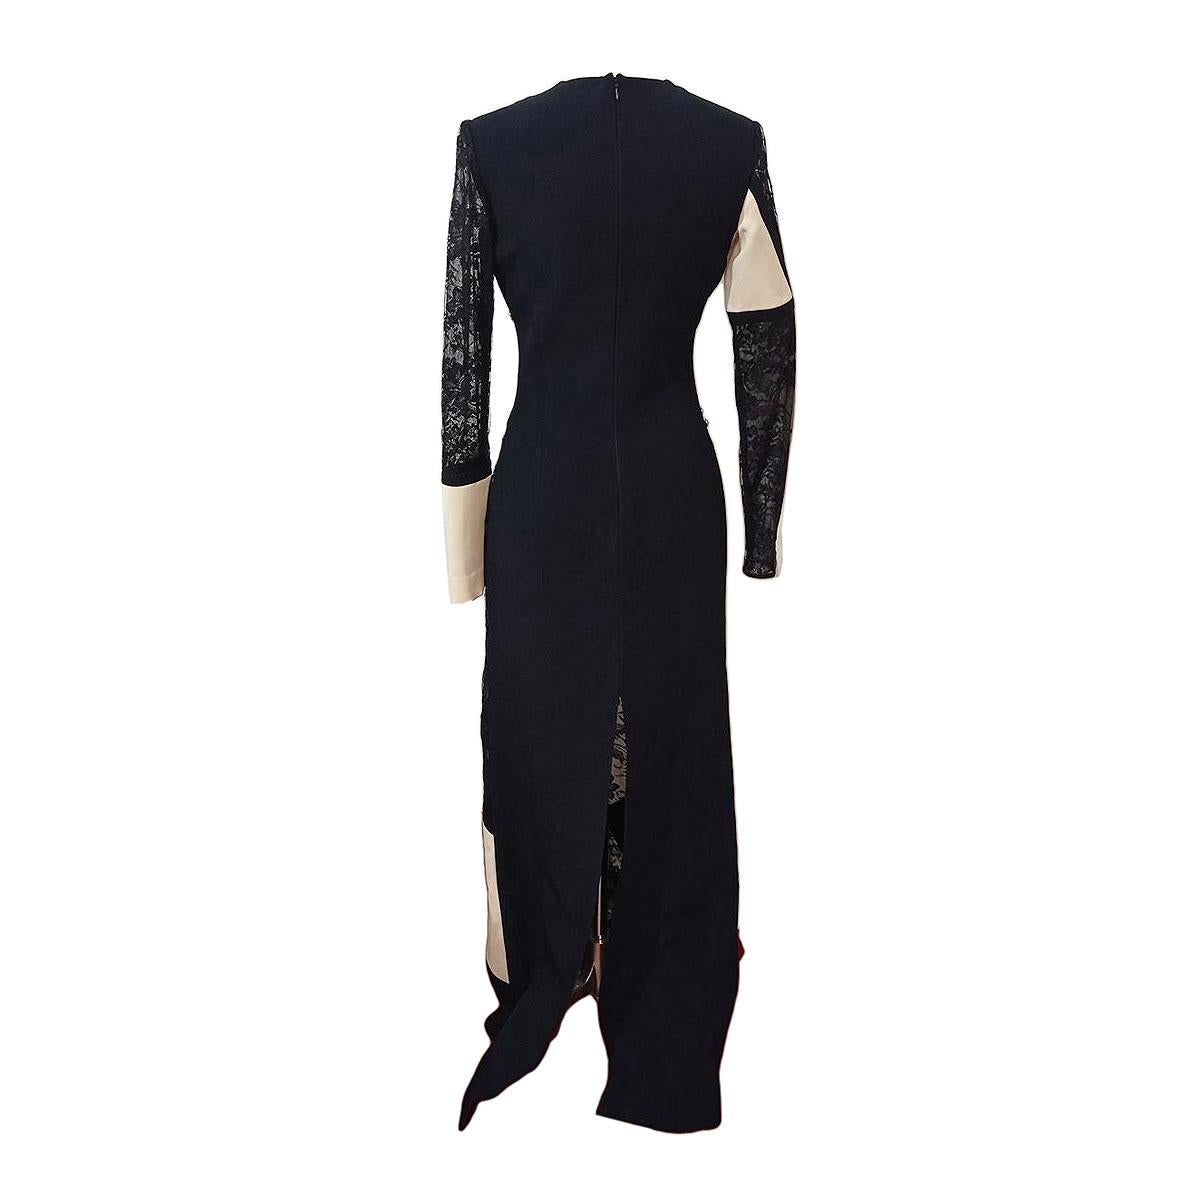 Wonderful long dress by Fausto Puglisi
Acetate and viscose
Black and white
Amazing black lace
Golden metal shells
Long sleeves
Maximum length cm 156 (61,4 inches)
Shoulder cm 37 (14,5 inches)
Worldwide express shipping included in the price !